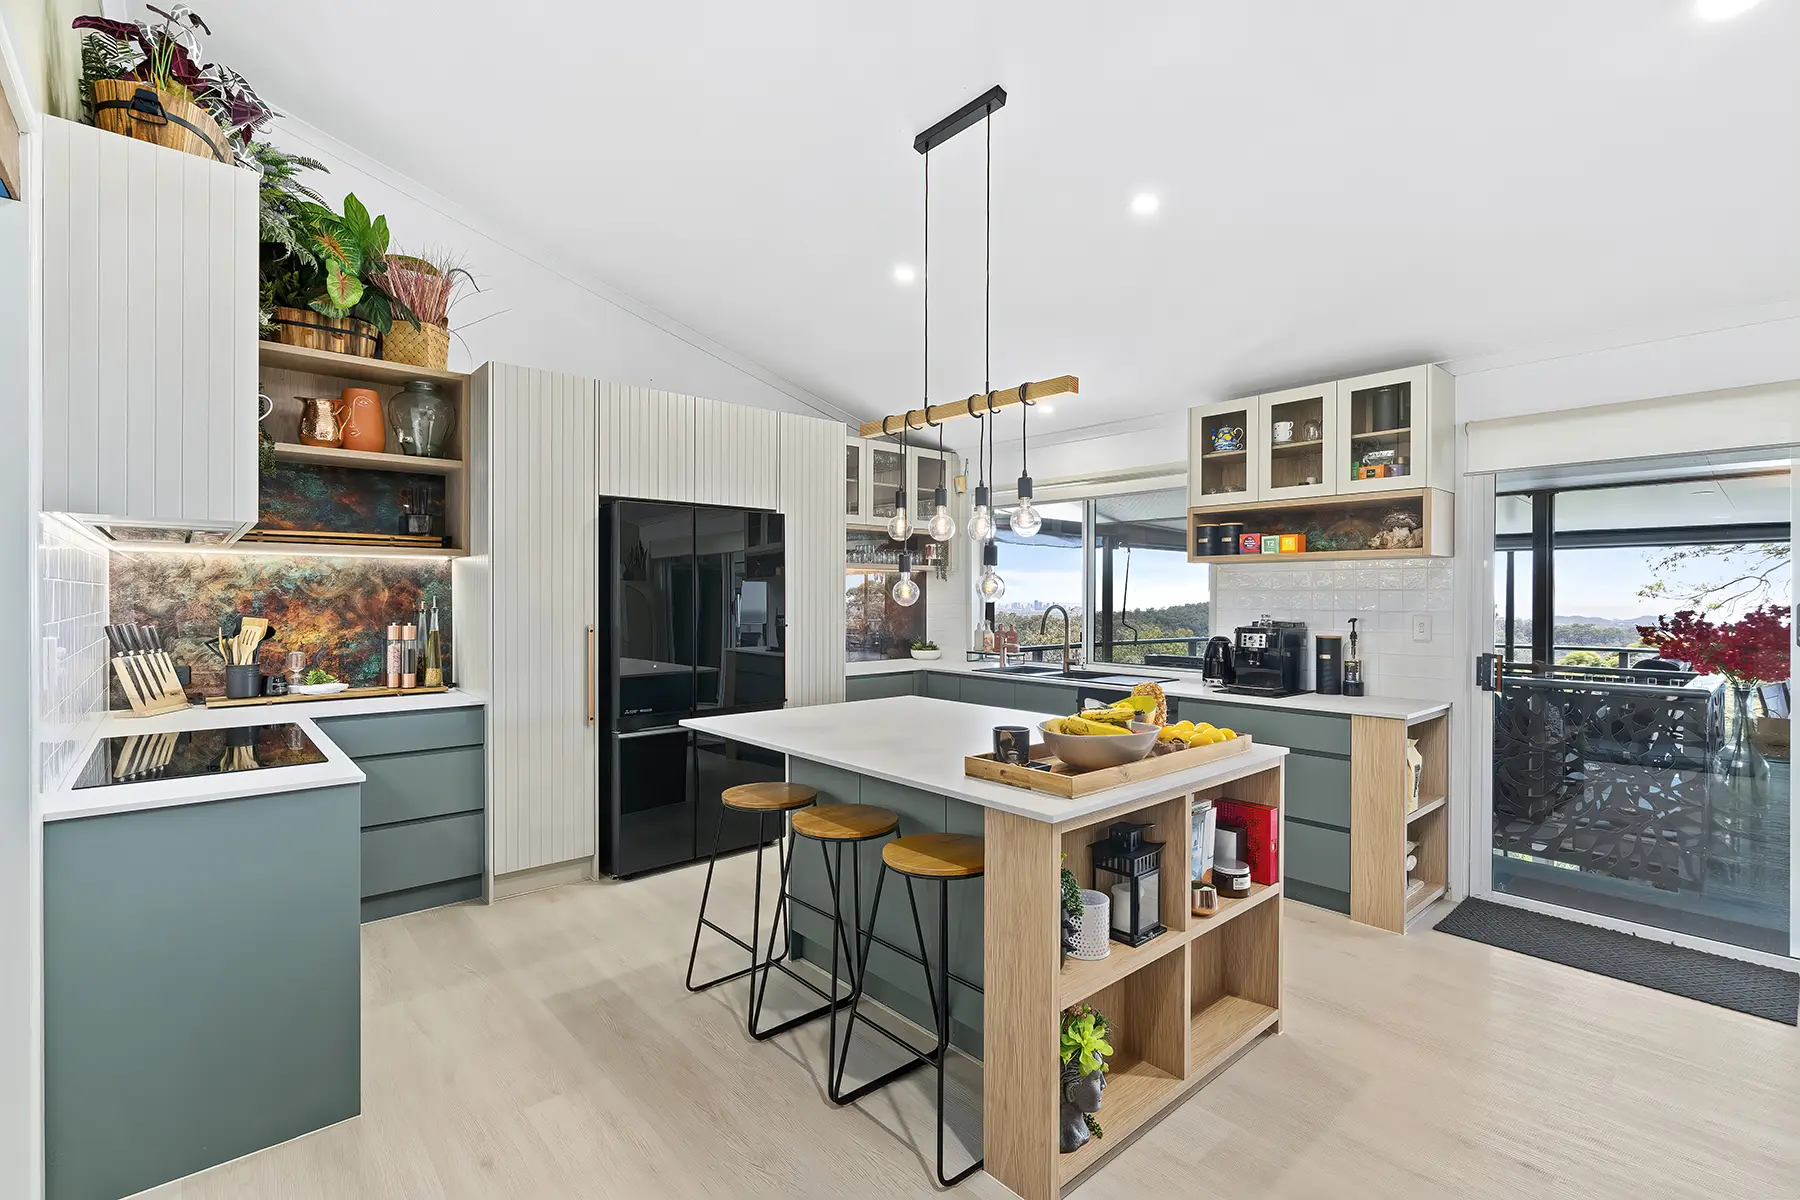 Modern Gold Coast kitchen renovation showcasing stylish design with skyline view, embodying a blend of aesthetics and practicality